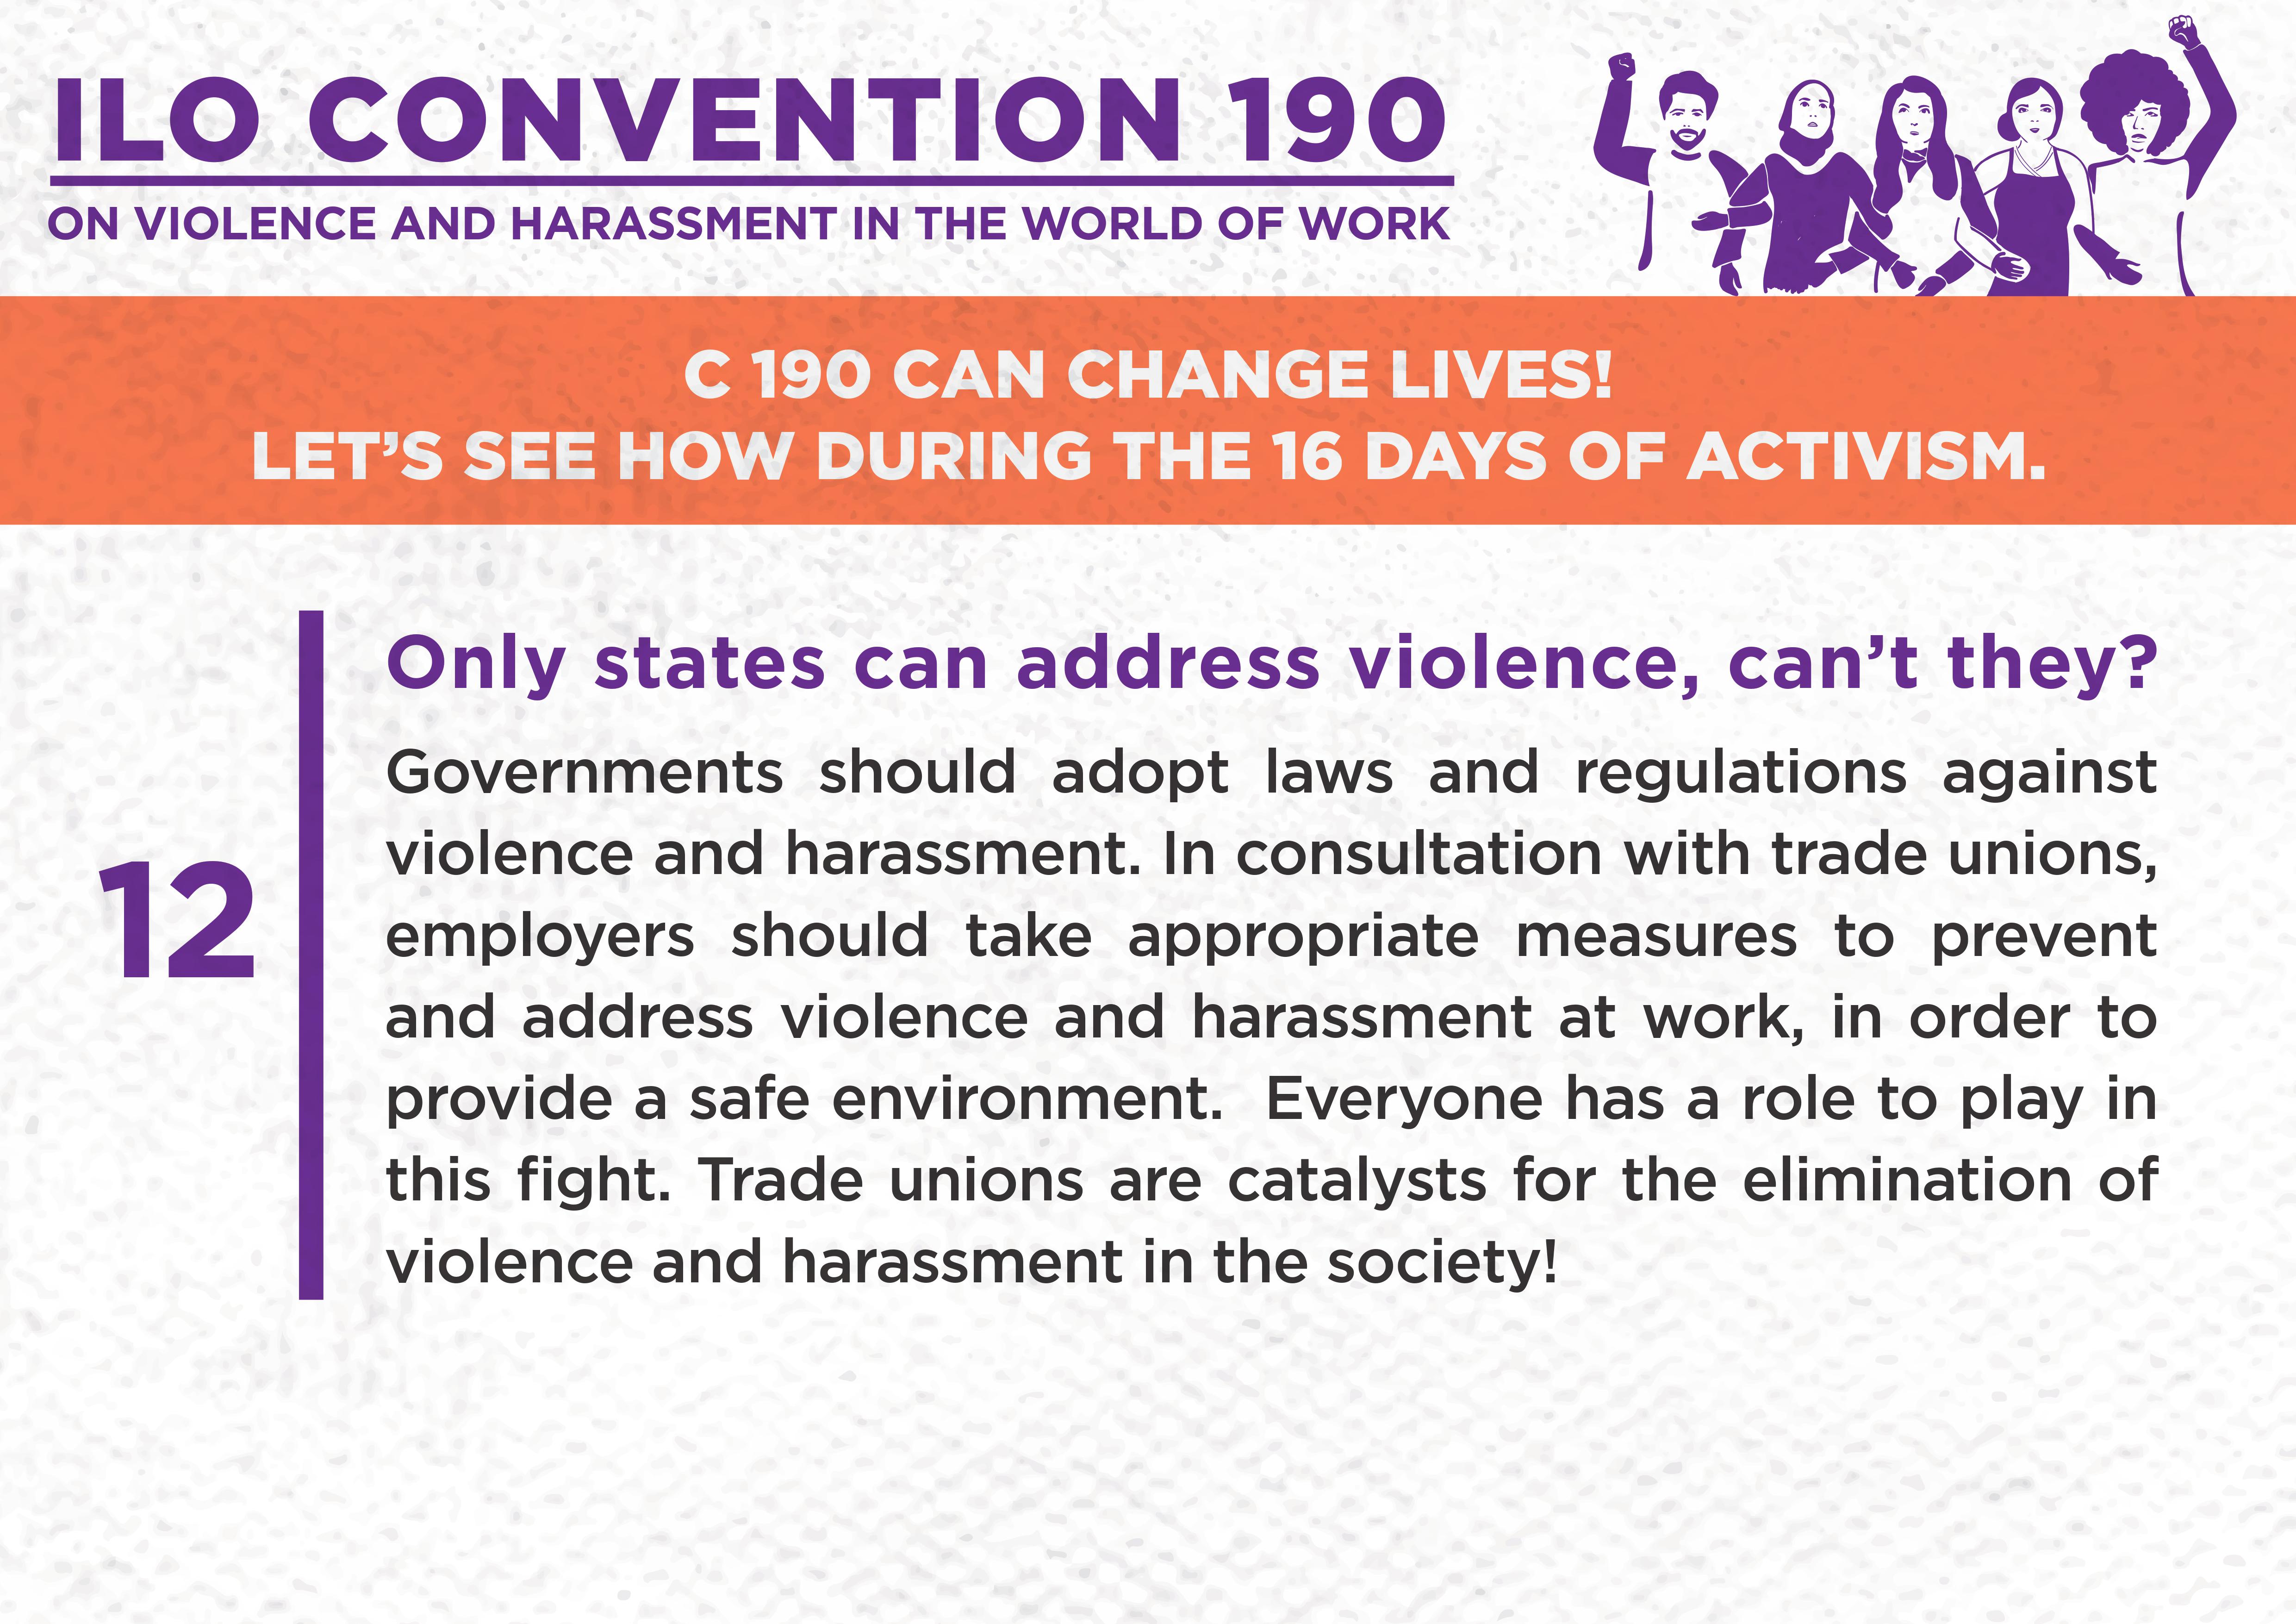 12. Only states can address violence, can’t they?